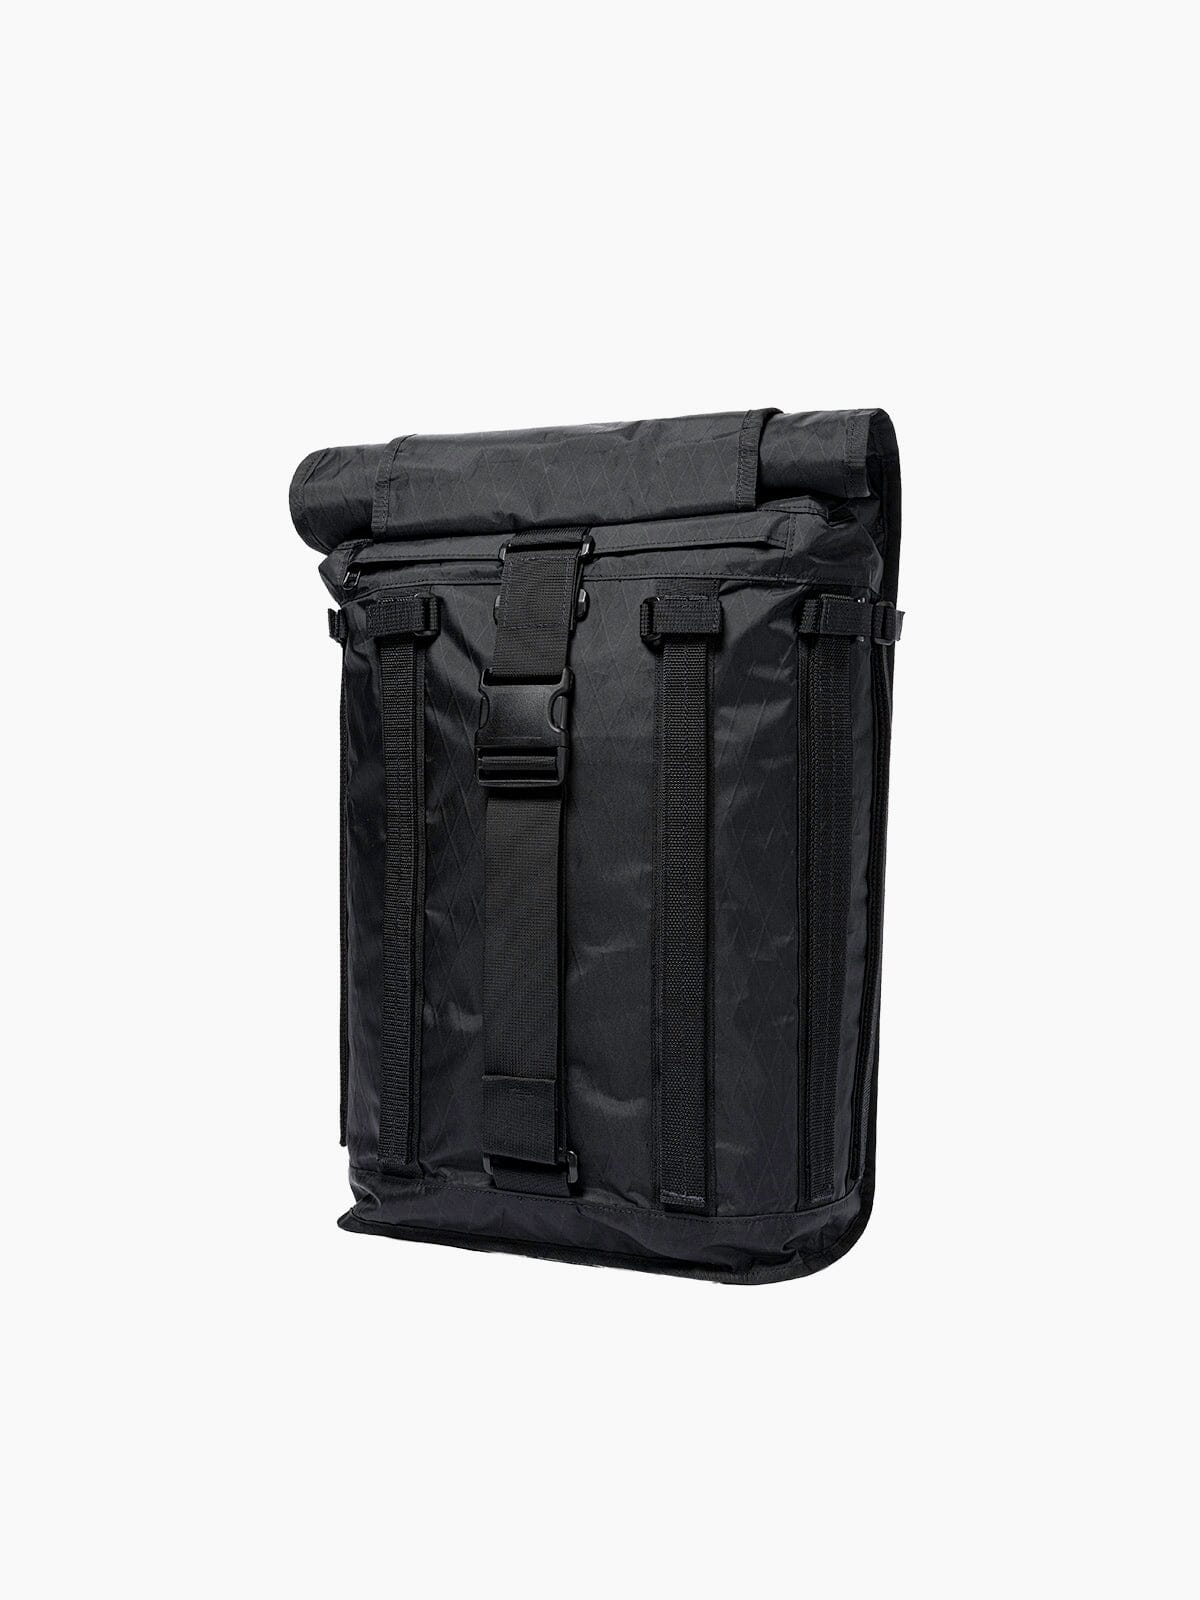 R6 Arkiv Field Pack 40L by Mission Workshop - Weatherproof Bags & Technical Apparel - San Francisco & Los Angeles - Built to endure - Guaranteed forever